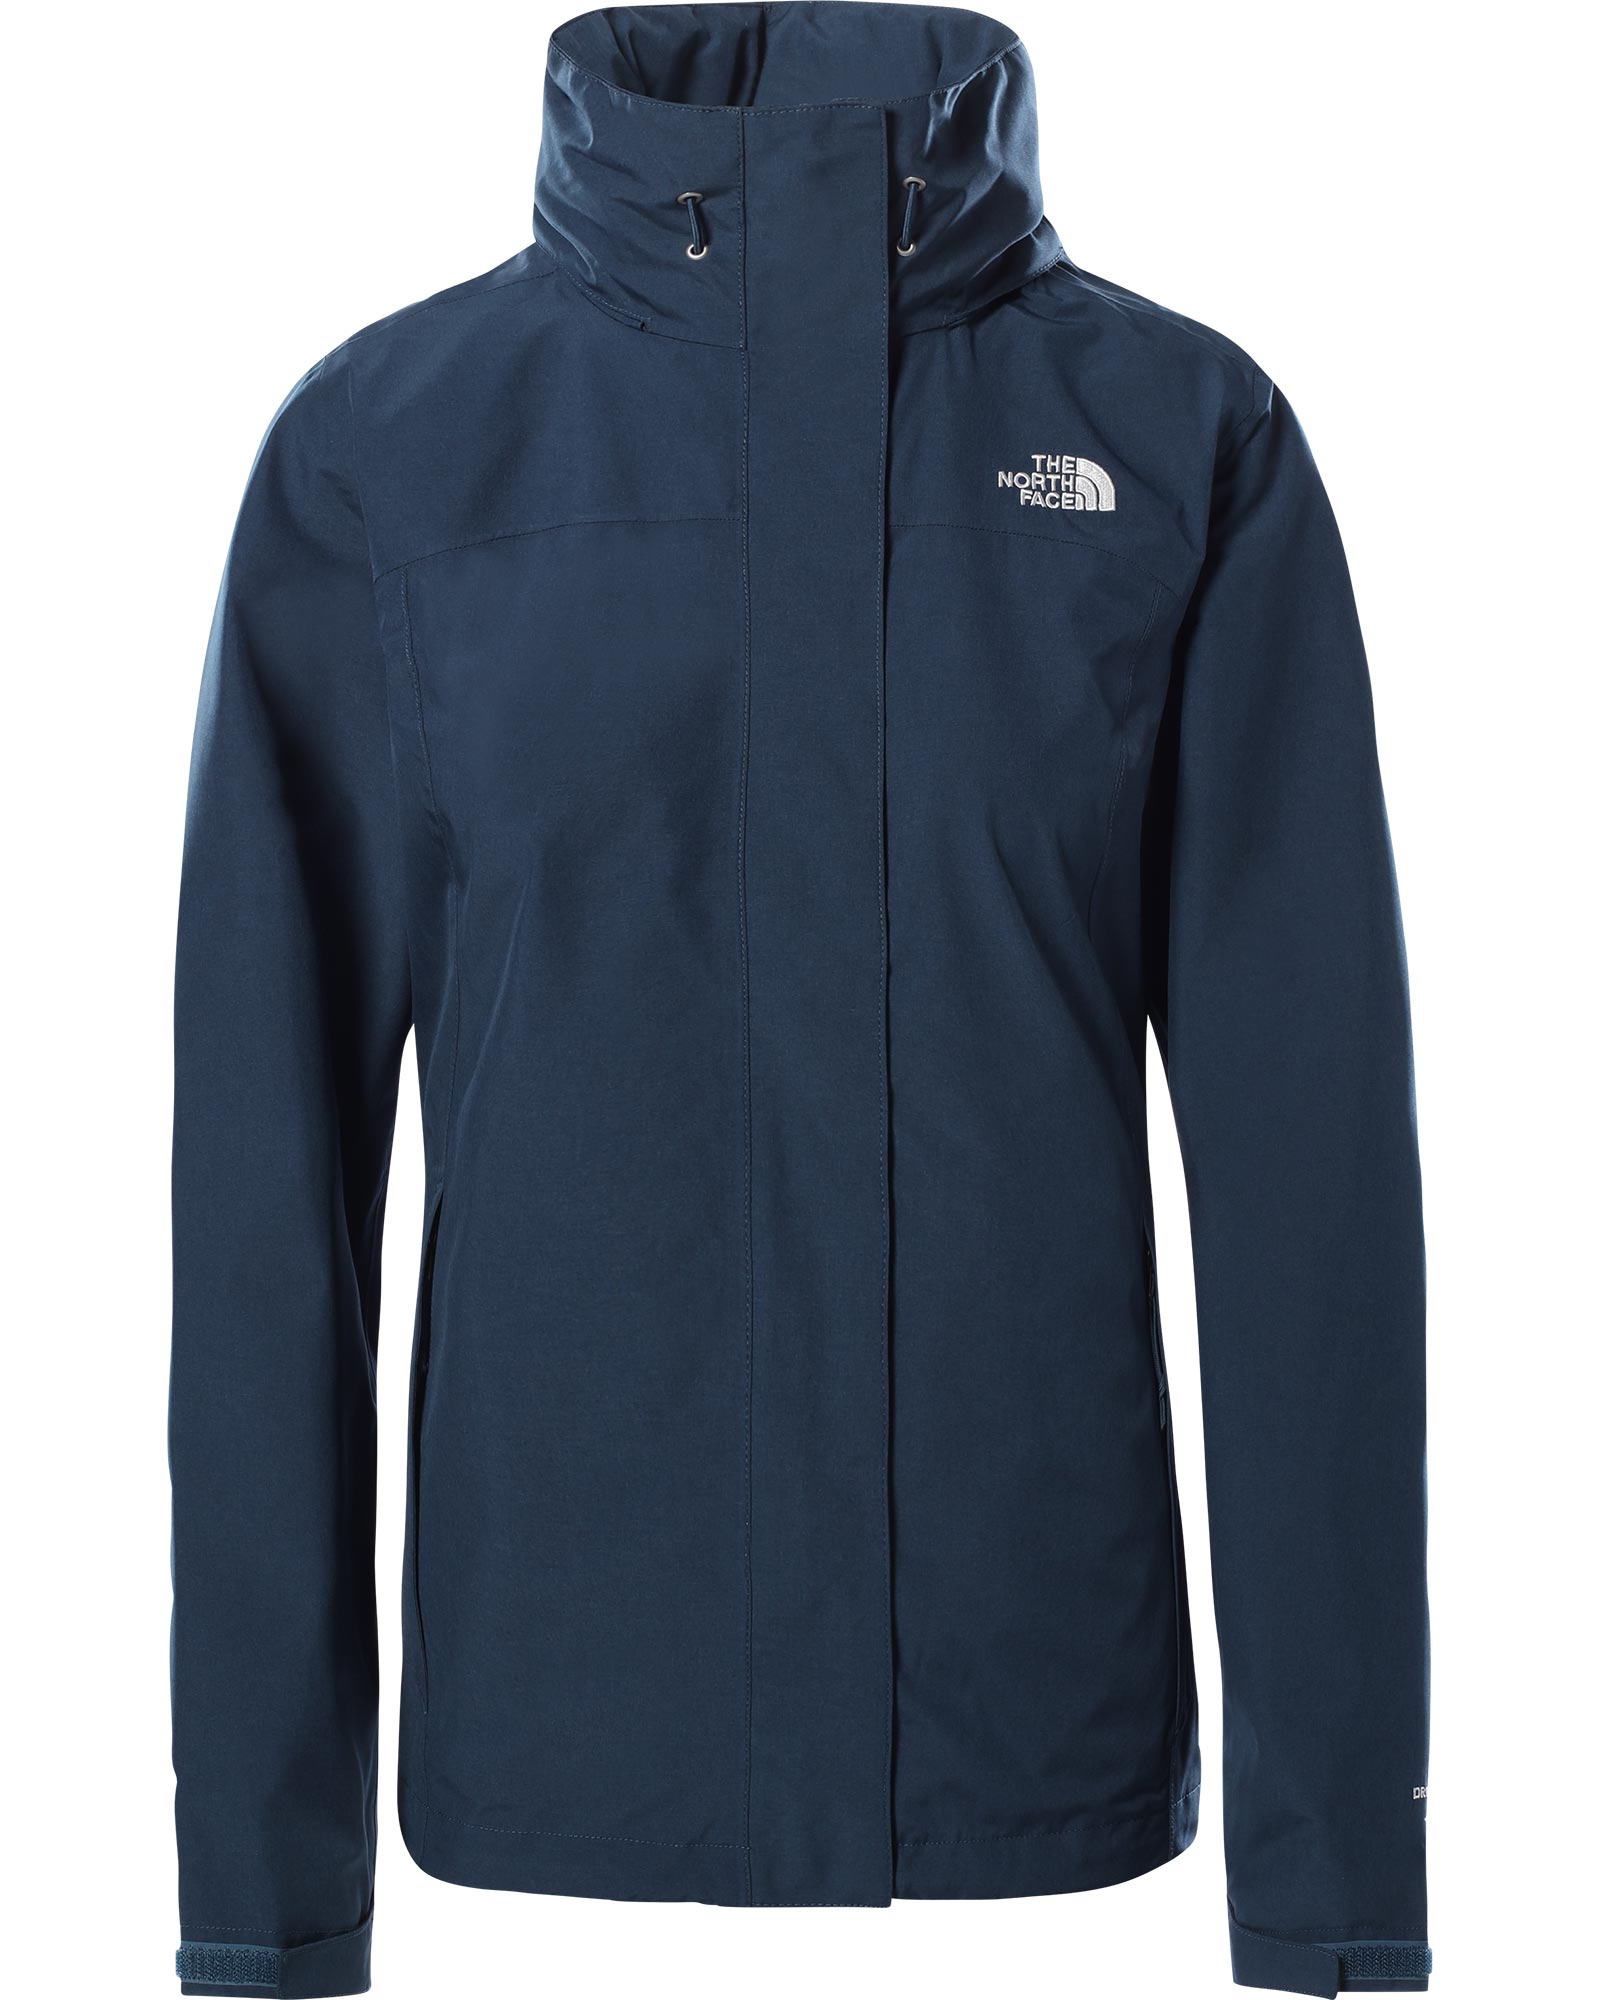 The North Face Sangro DryVent Women’s Jacket - Monterey Blue Heather XS